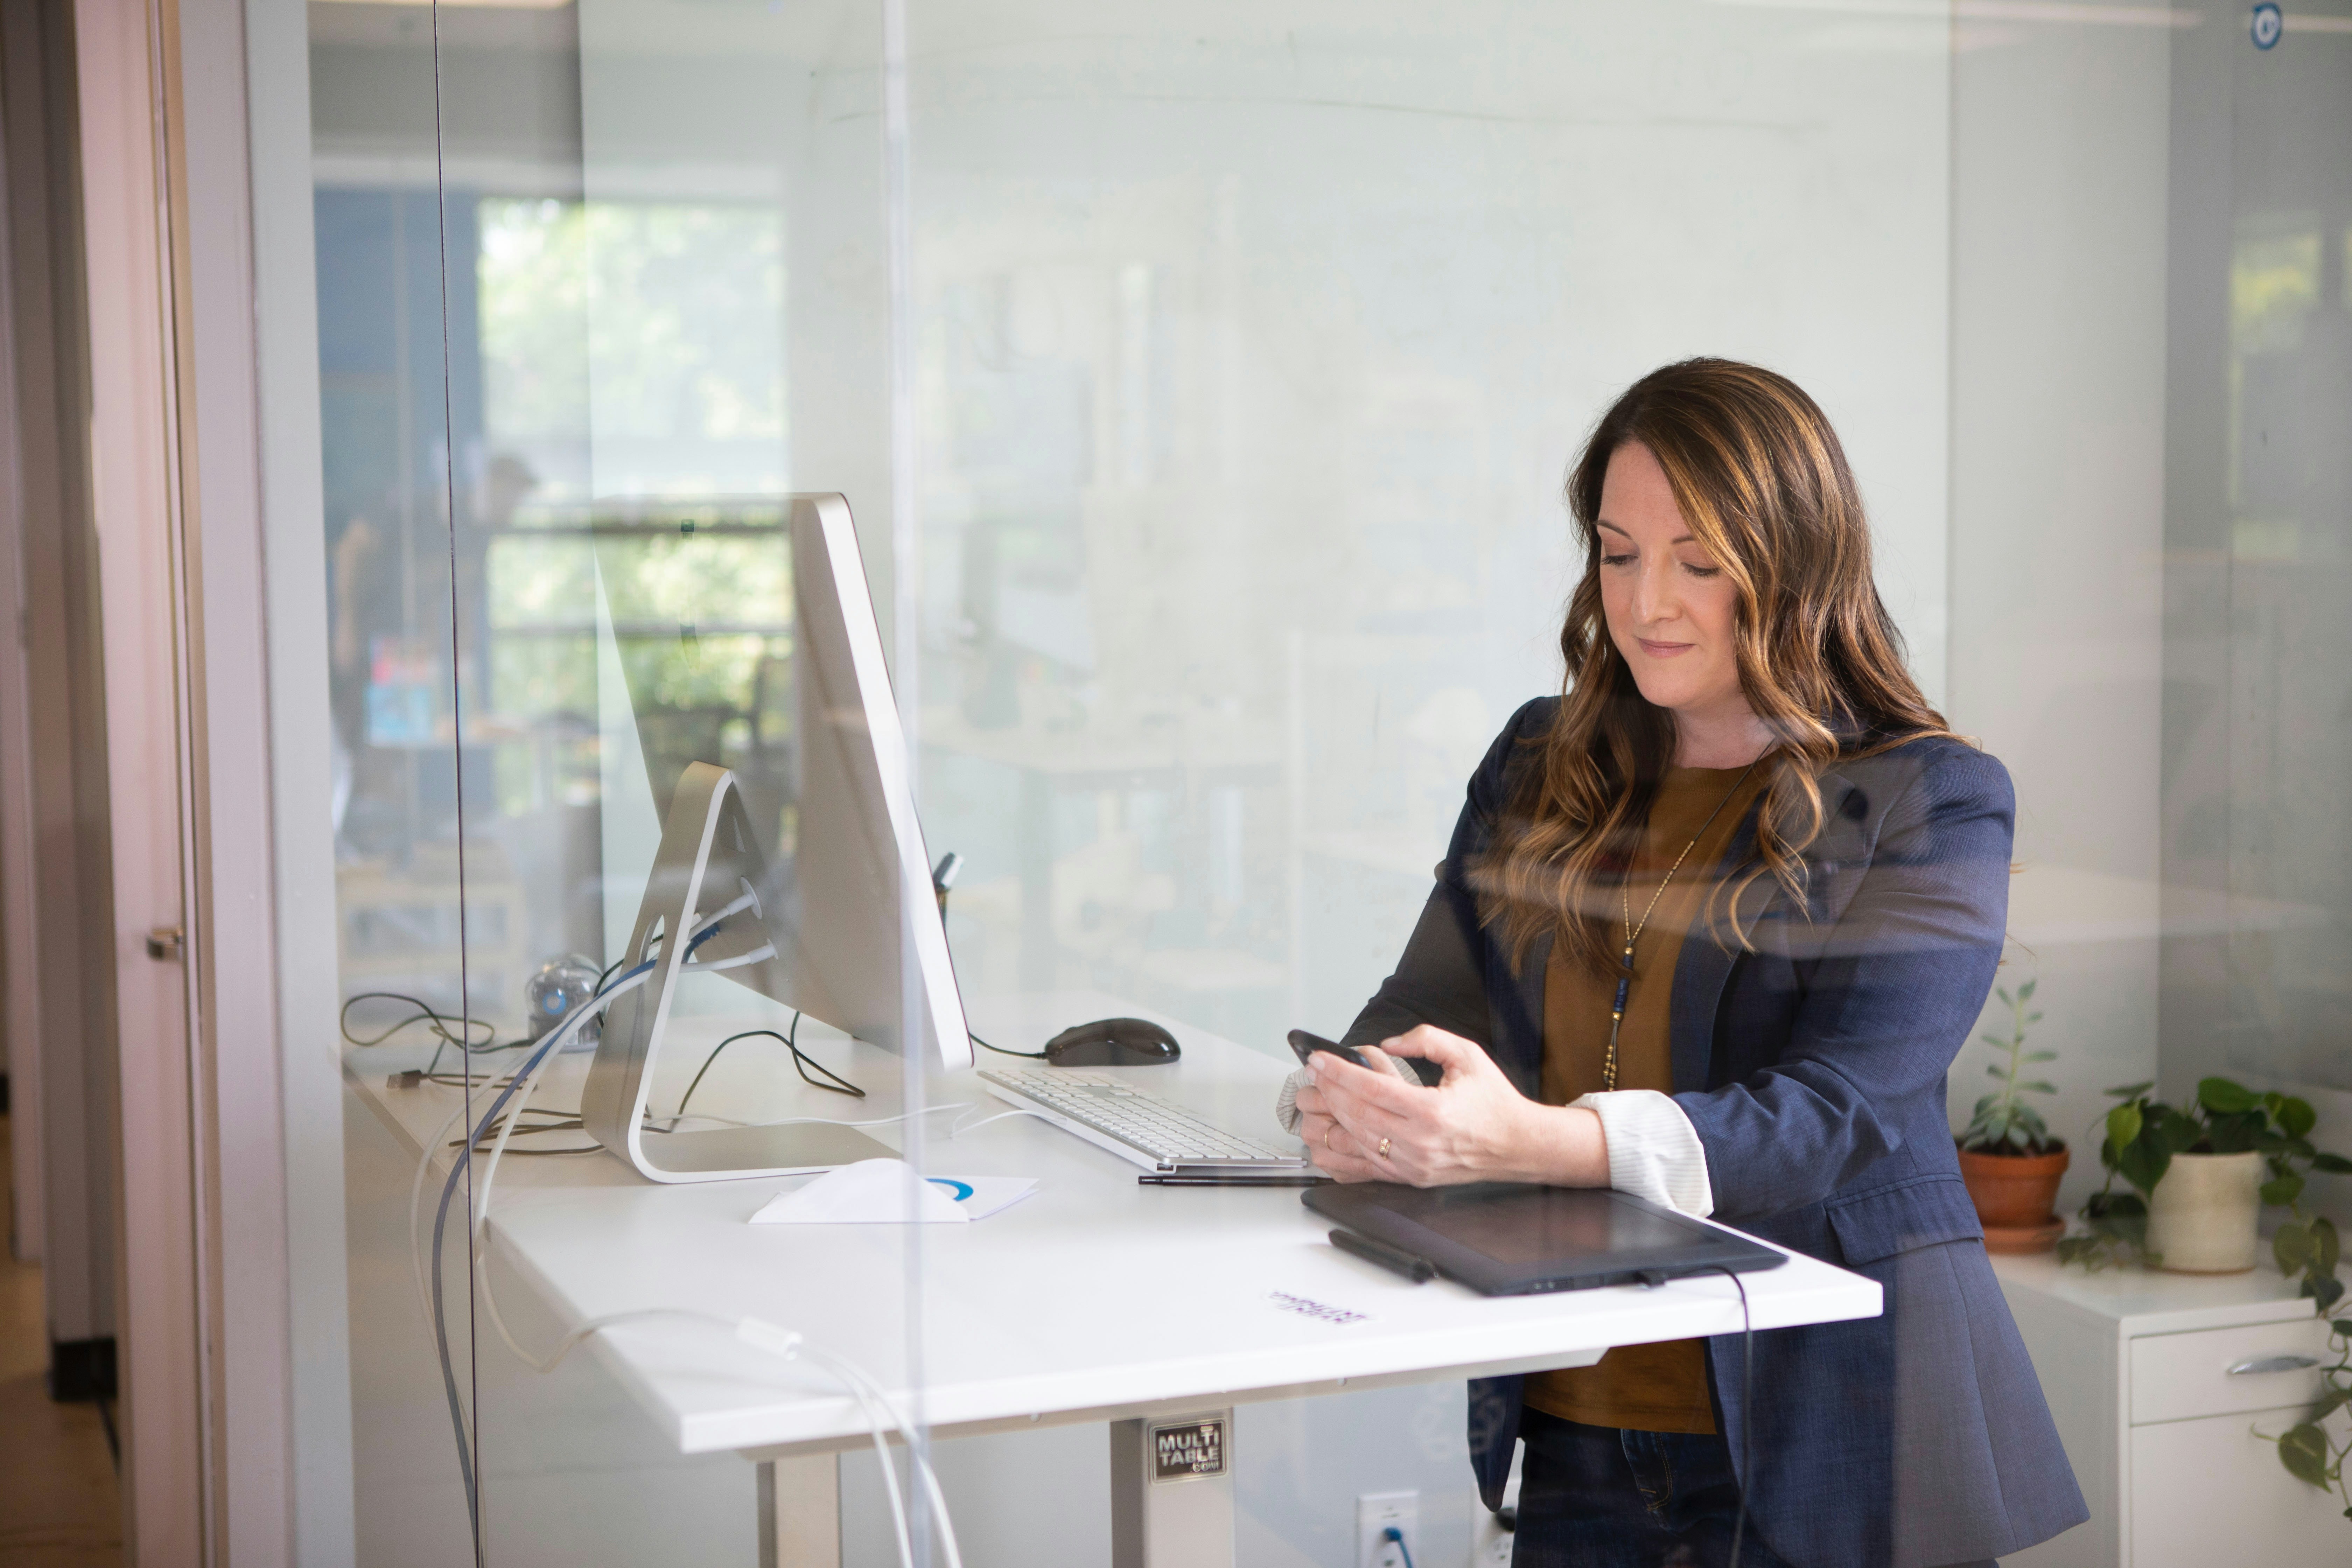 Sales woman checking her phone standing at desk with laptop